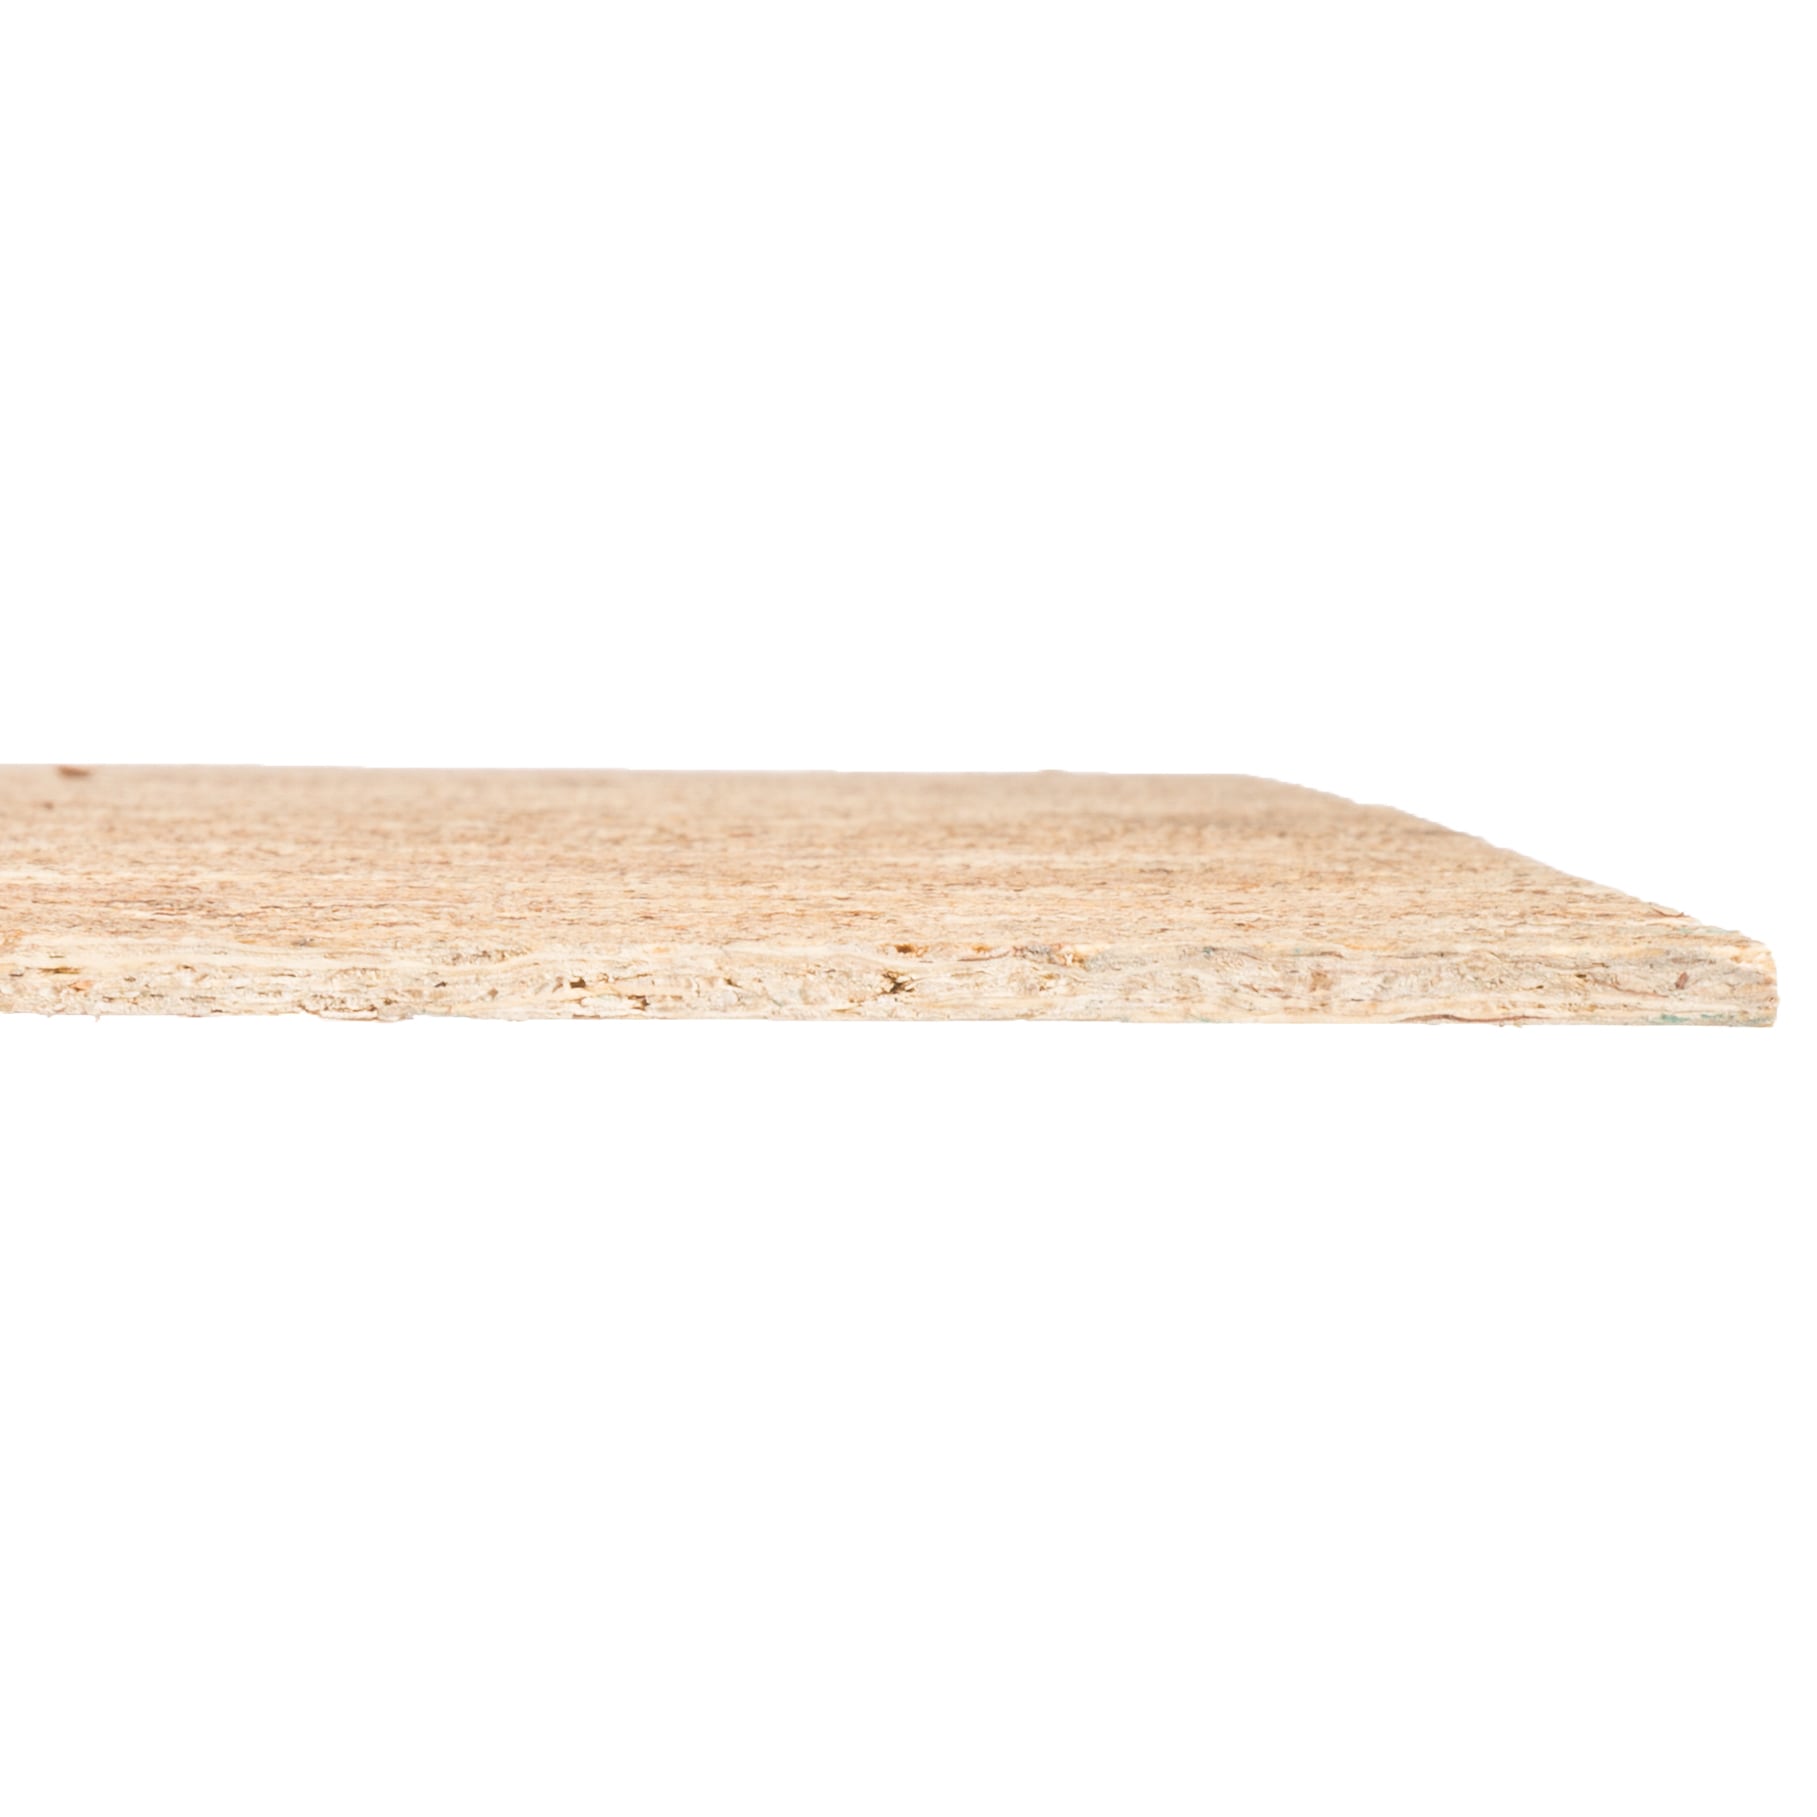 1/2-in x 4-ft x 8-ft OSB (Oriented Strand Board) Sheathing in the